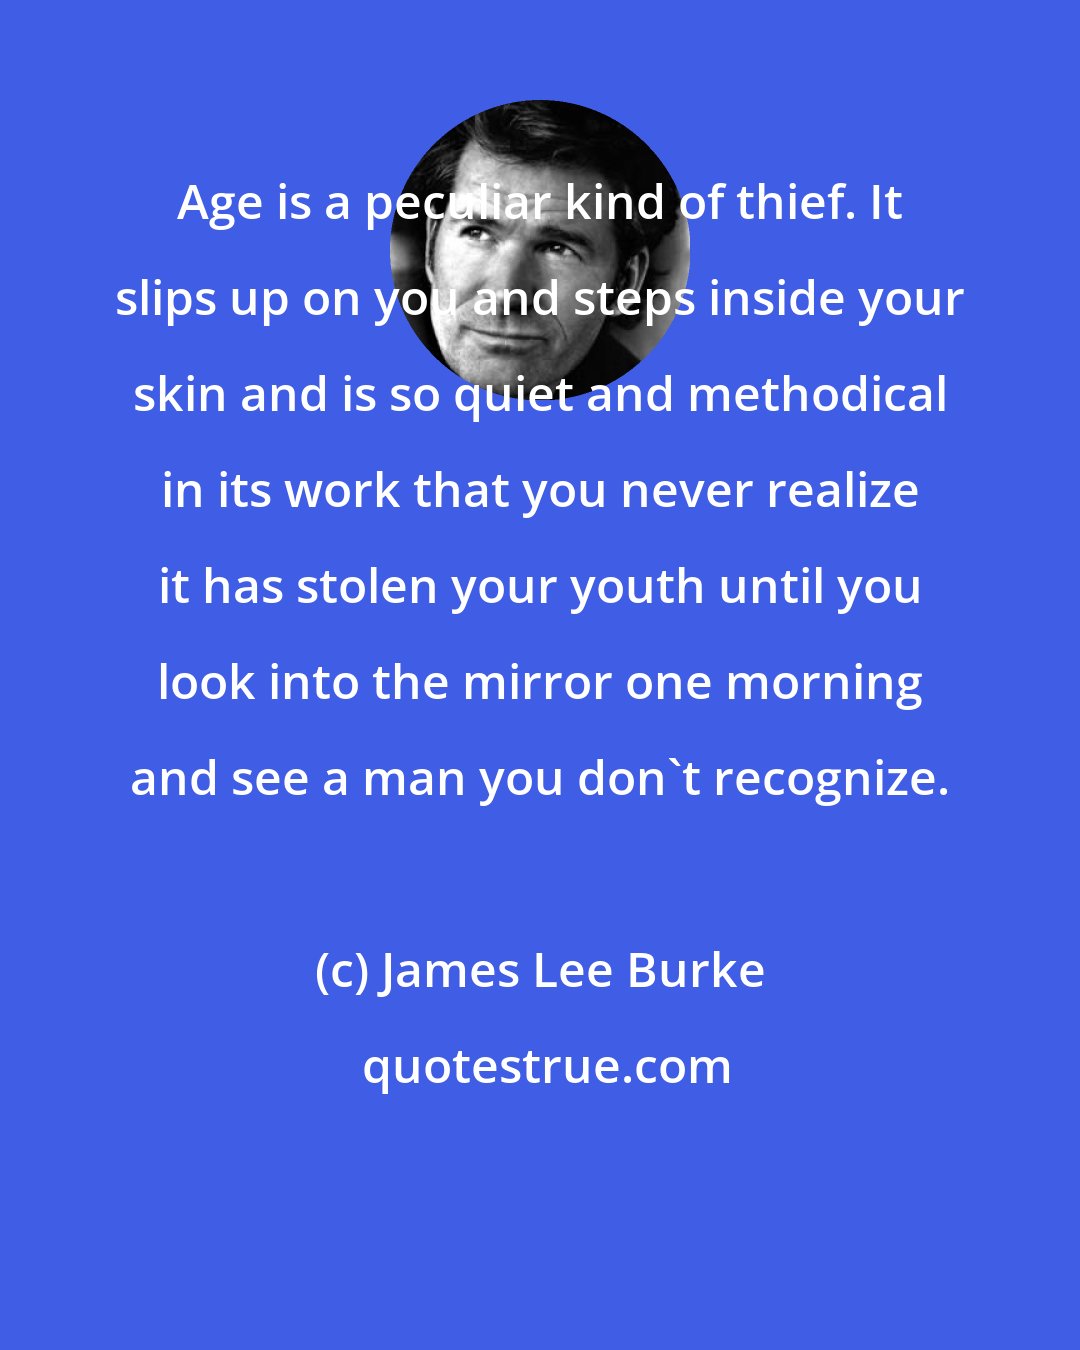 James Lee Burke: Age is a peculiar kind of thief. It slips up on you and steps inside your skin and is so quiet and methodical in its work that you never realize it has stolen your youth until you look into the mirror one morning and see a man you don't recognize.